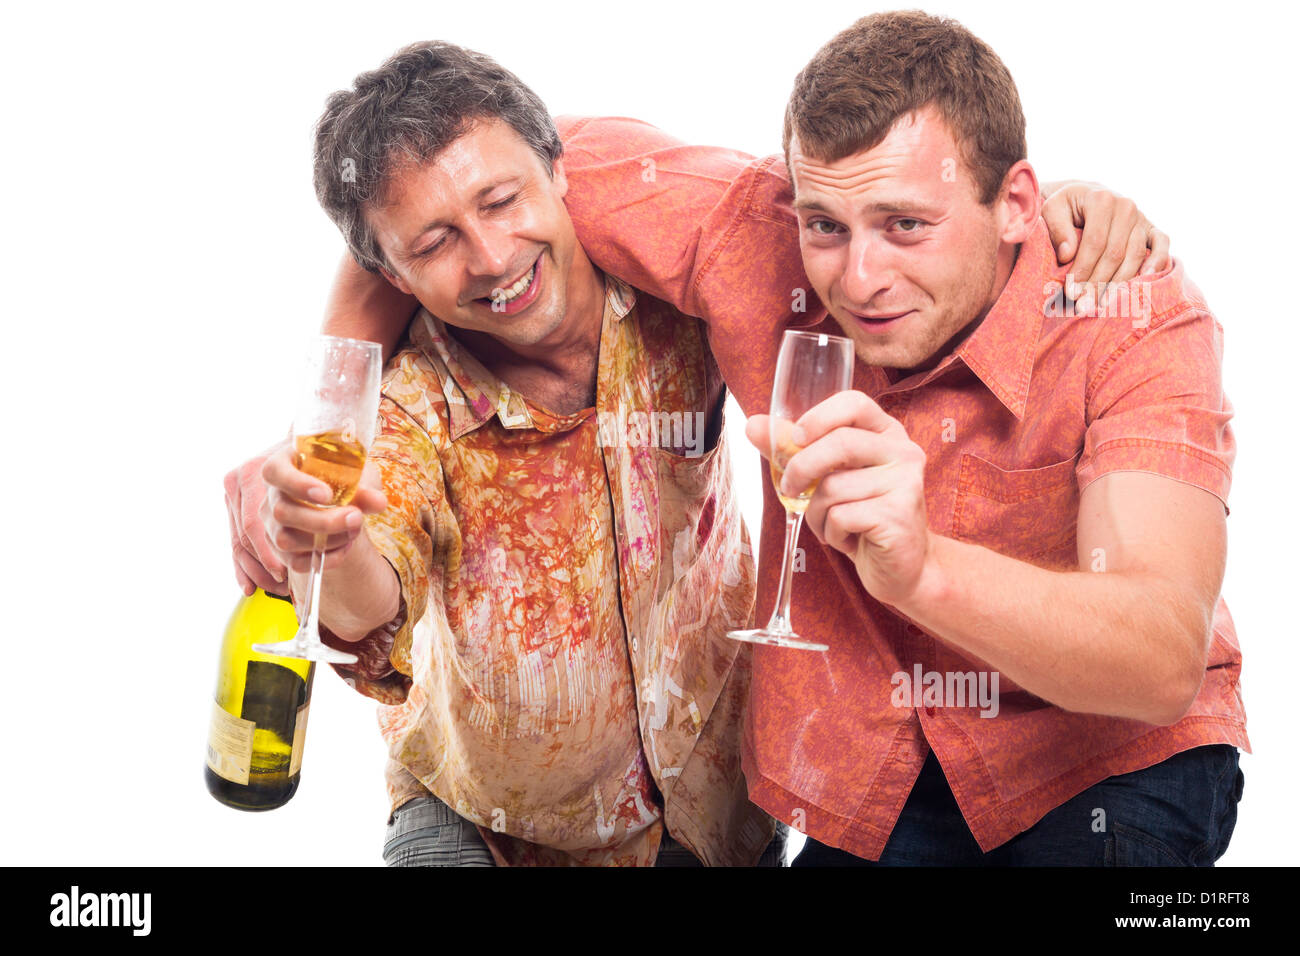 Two funny drunken men holding bottle and glass of alcohol, isolated on ...